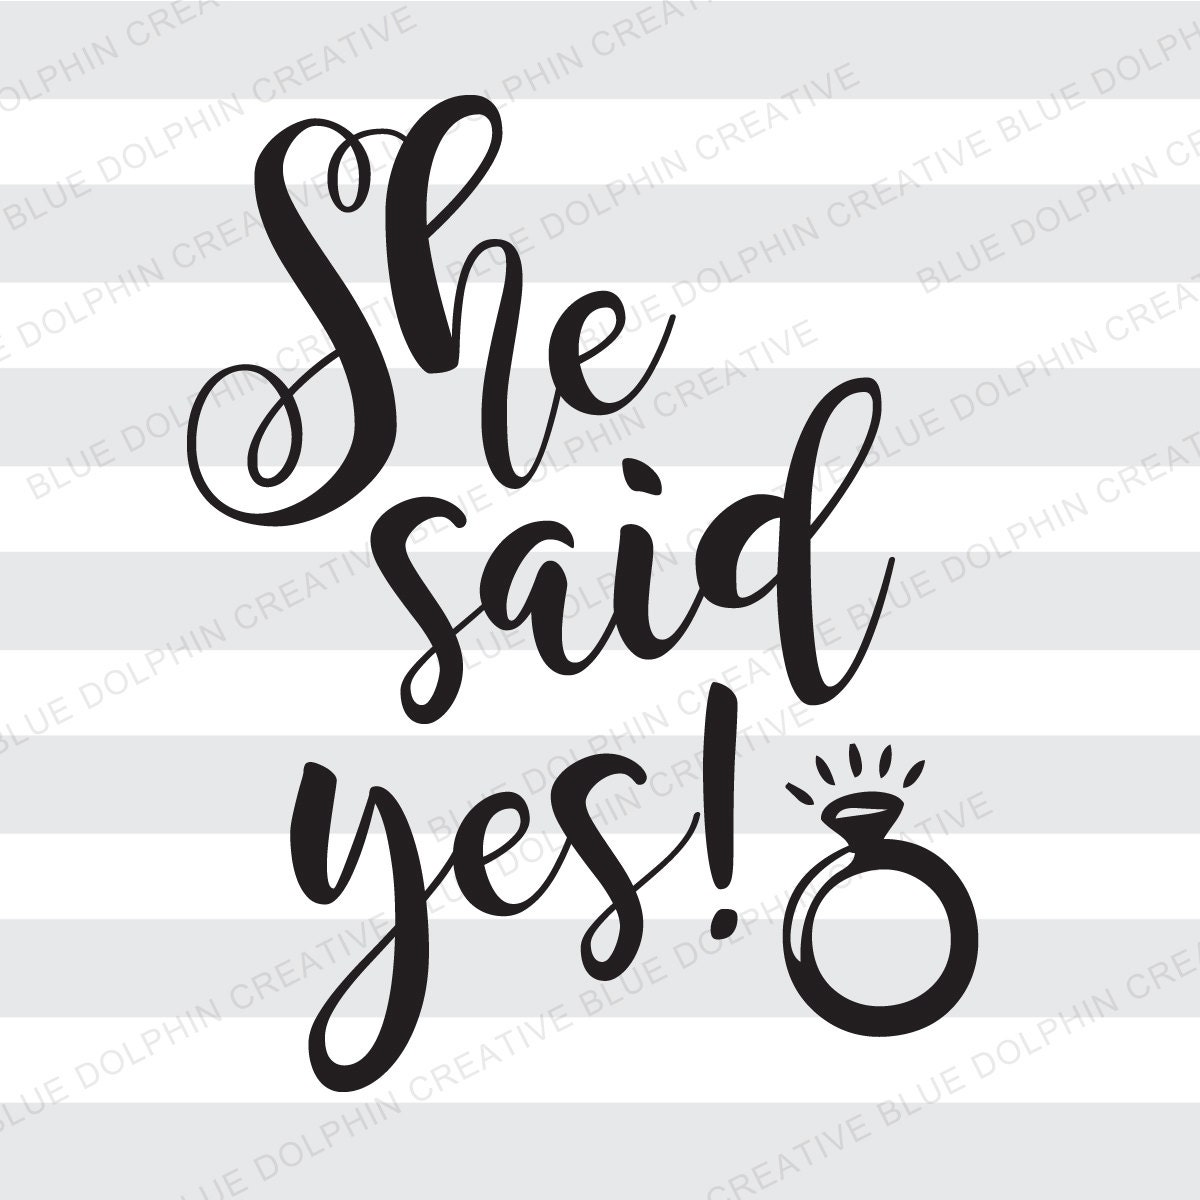 She Said Yes svg pdf png electronic cutter files diy